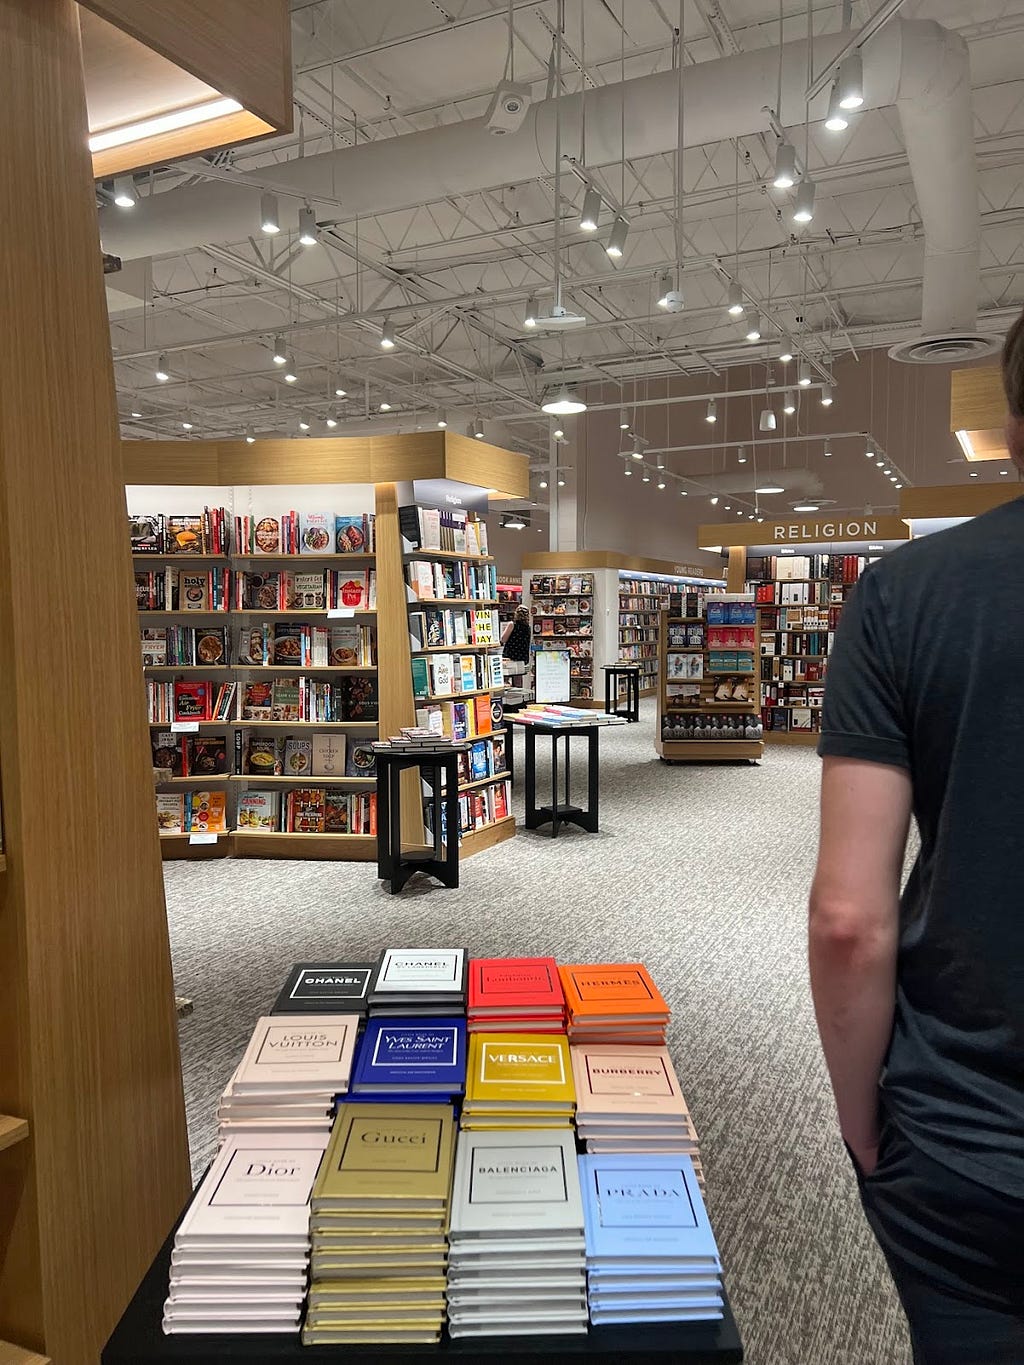 An image behind someone walking into the bookstacks in Barnes and Noble.